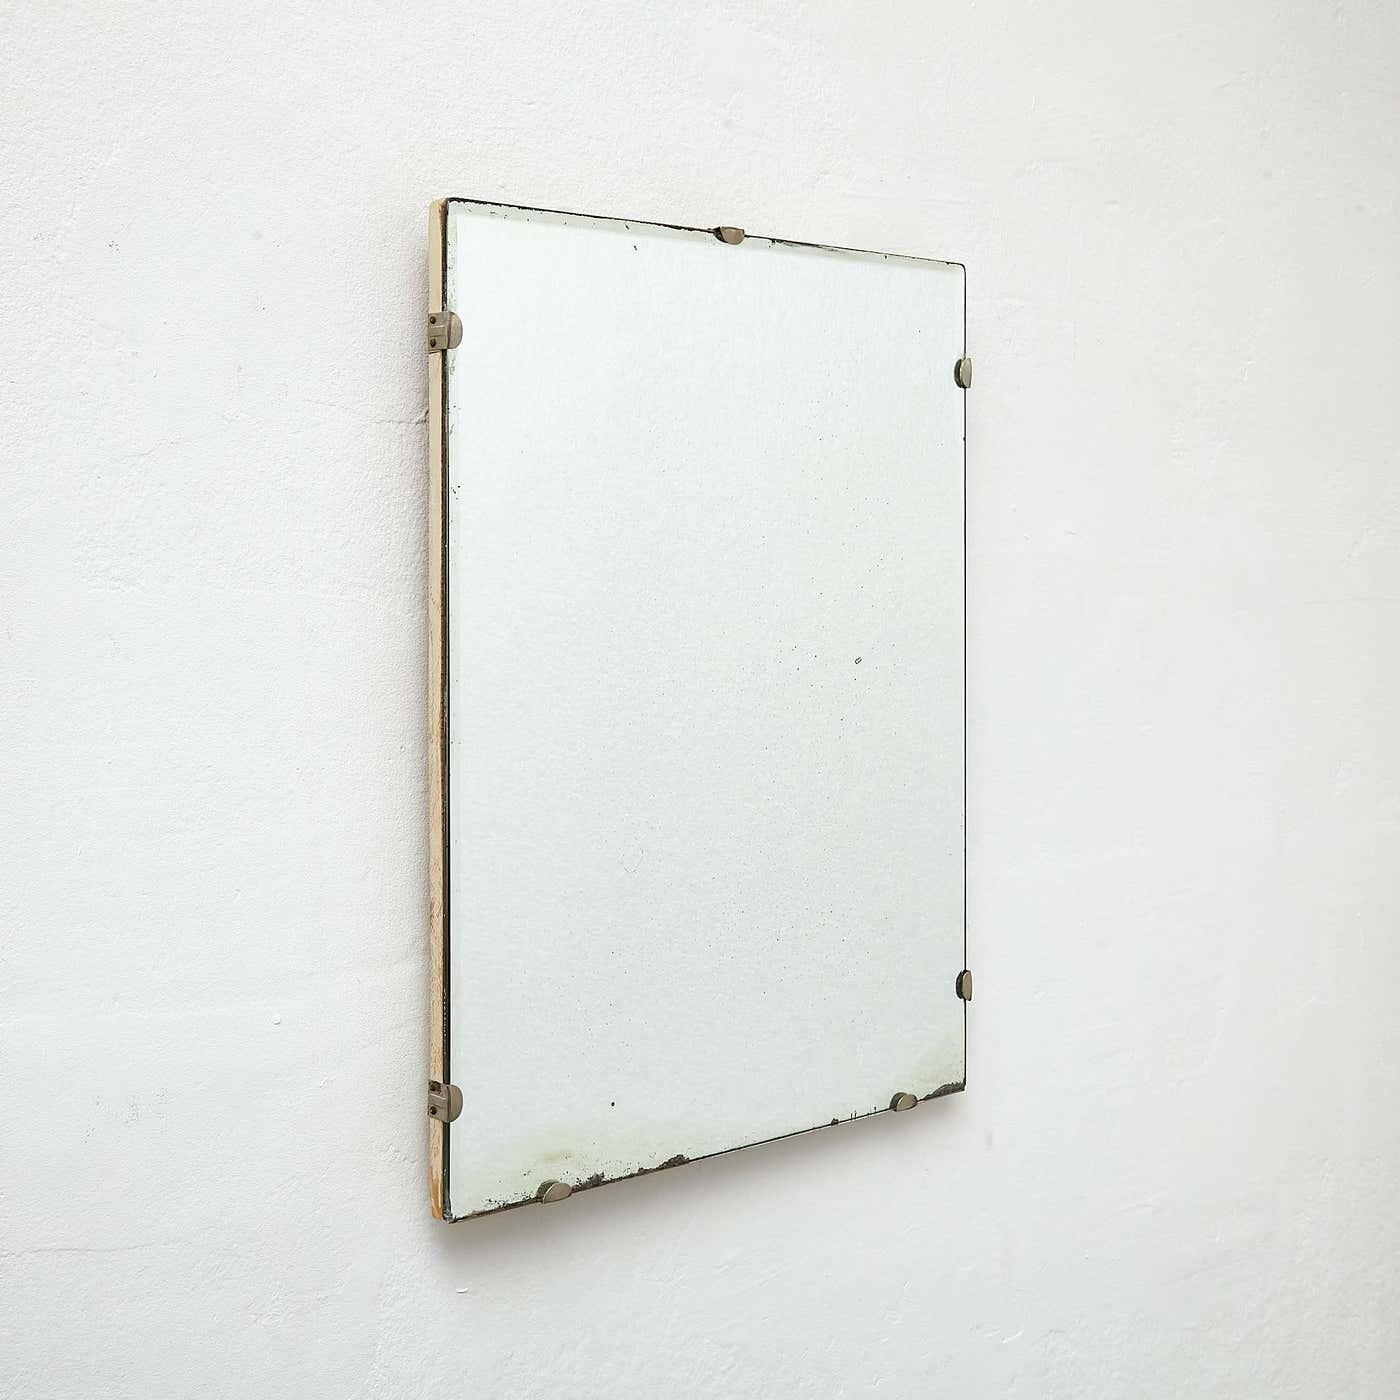 Antique Early 20th Century French Wall Mirror, circa 1940
   
Origin: France, circa 1940
Style: Antique Early 20th Century
Materials: Mirror

Elevate your decor with the timeless elegance of this Antique Early 20th Century French Wall Mirror,